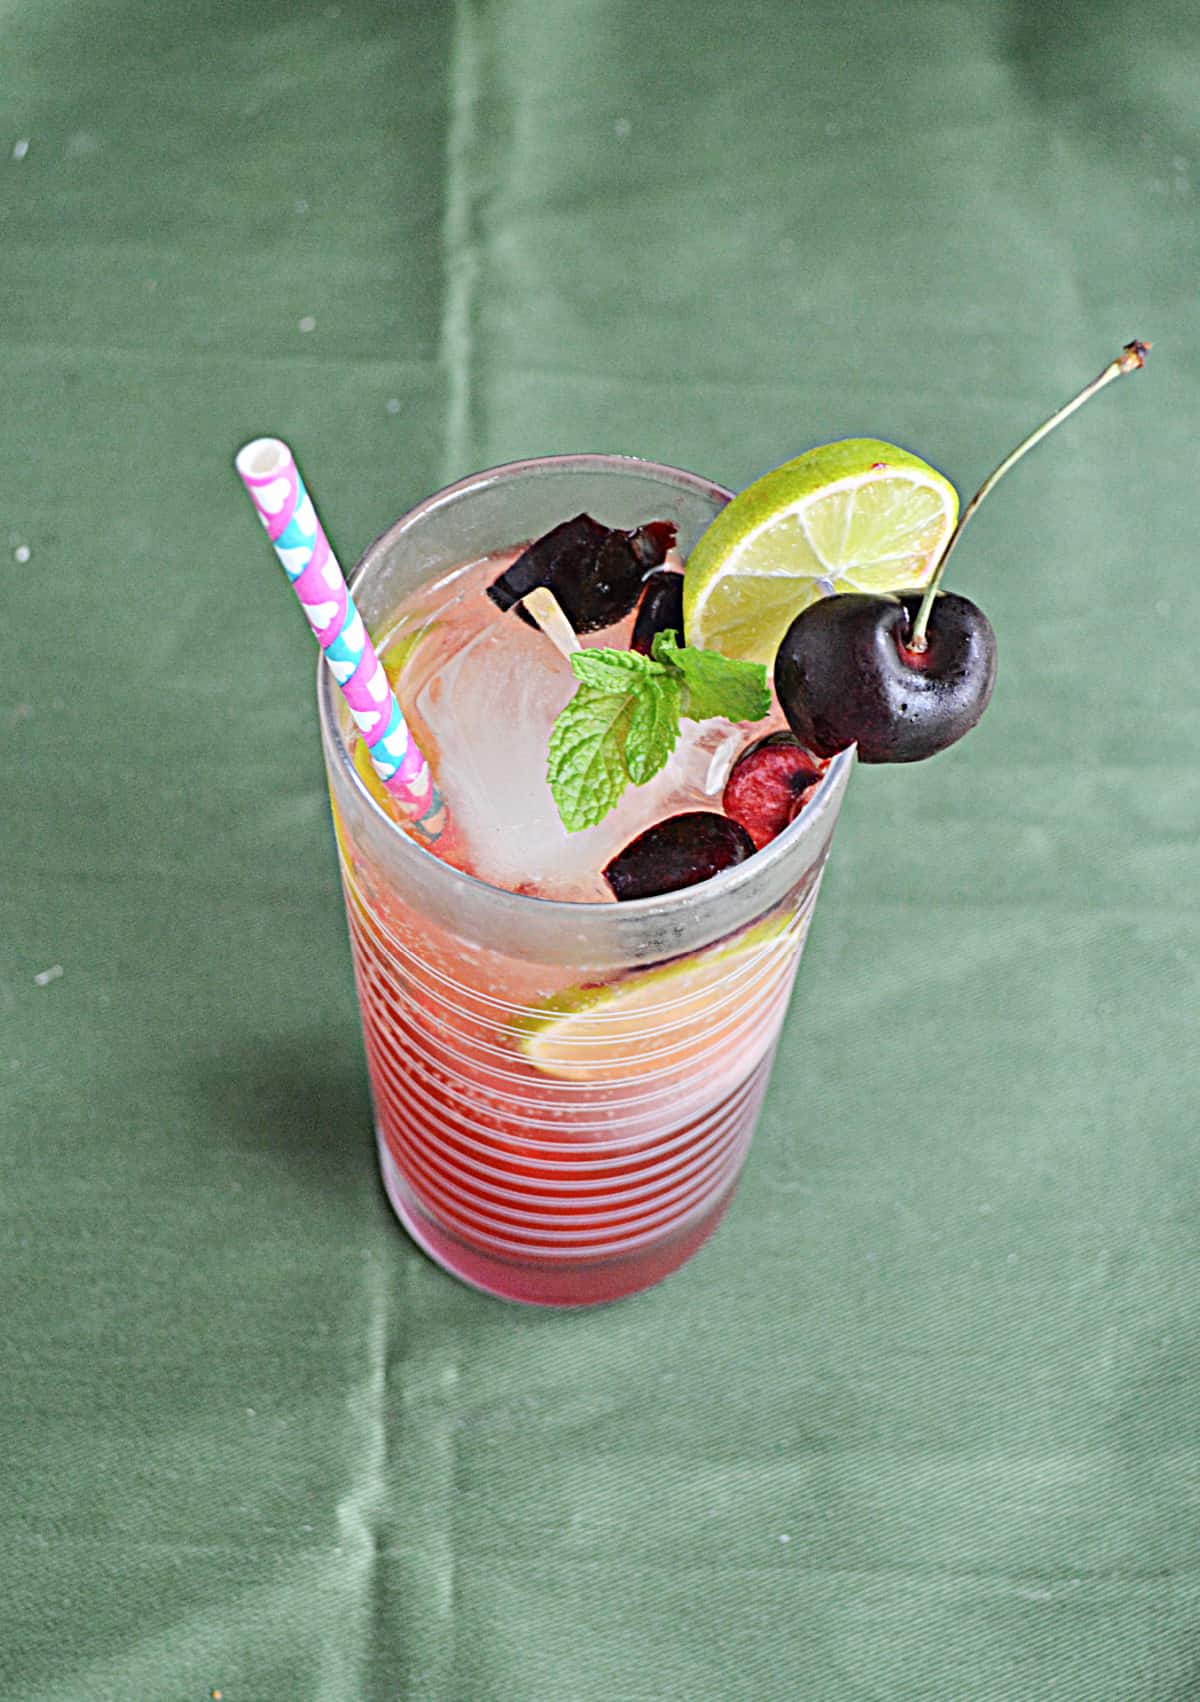 A top view of a glass of cherry mojito with lime, cherries, and mint on top.